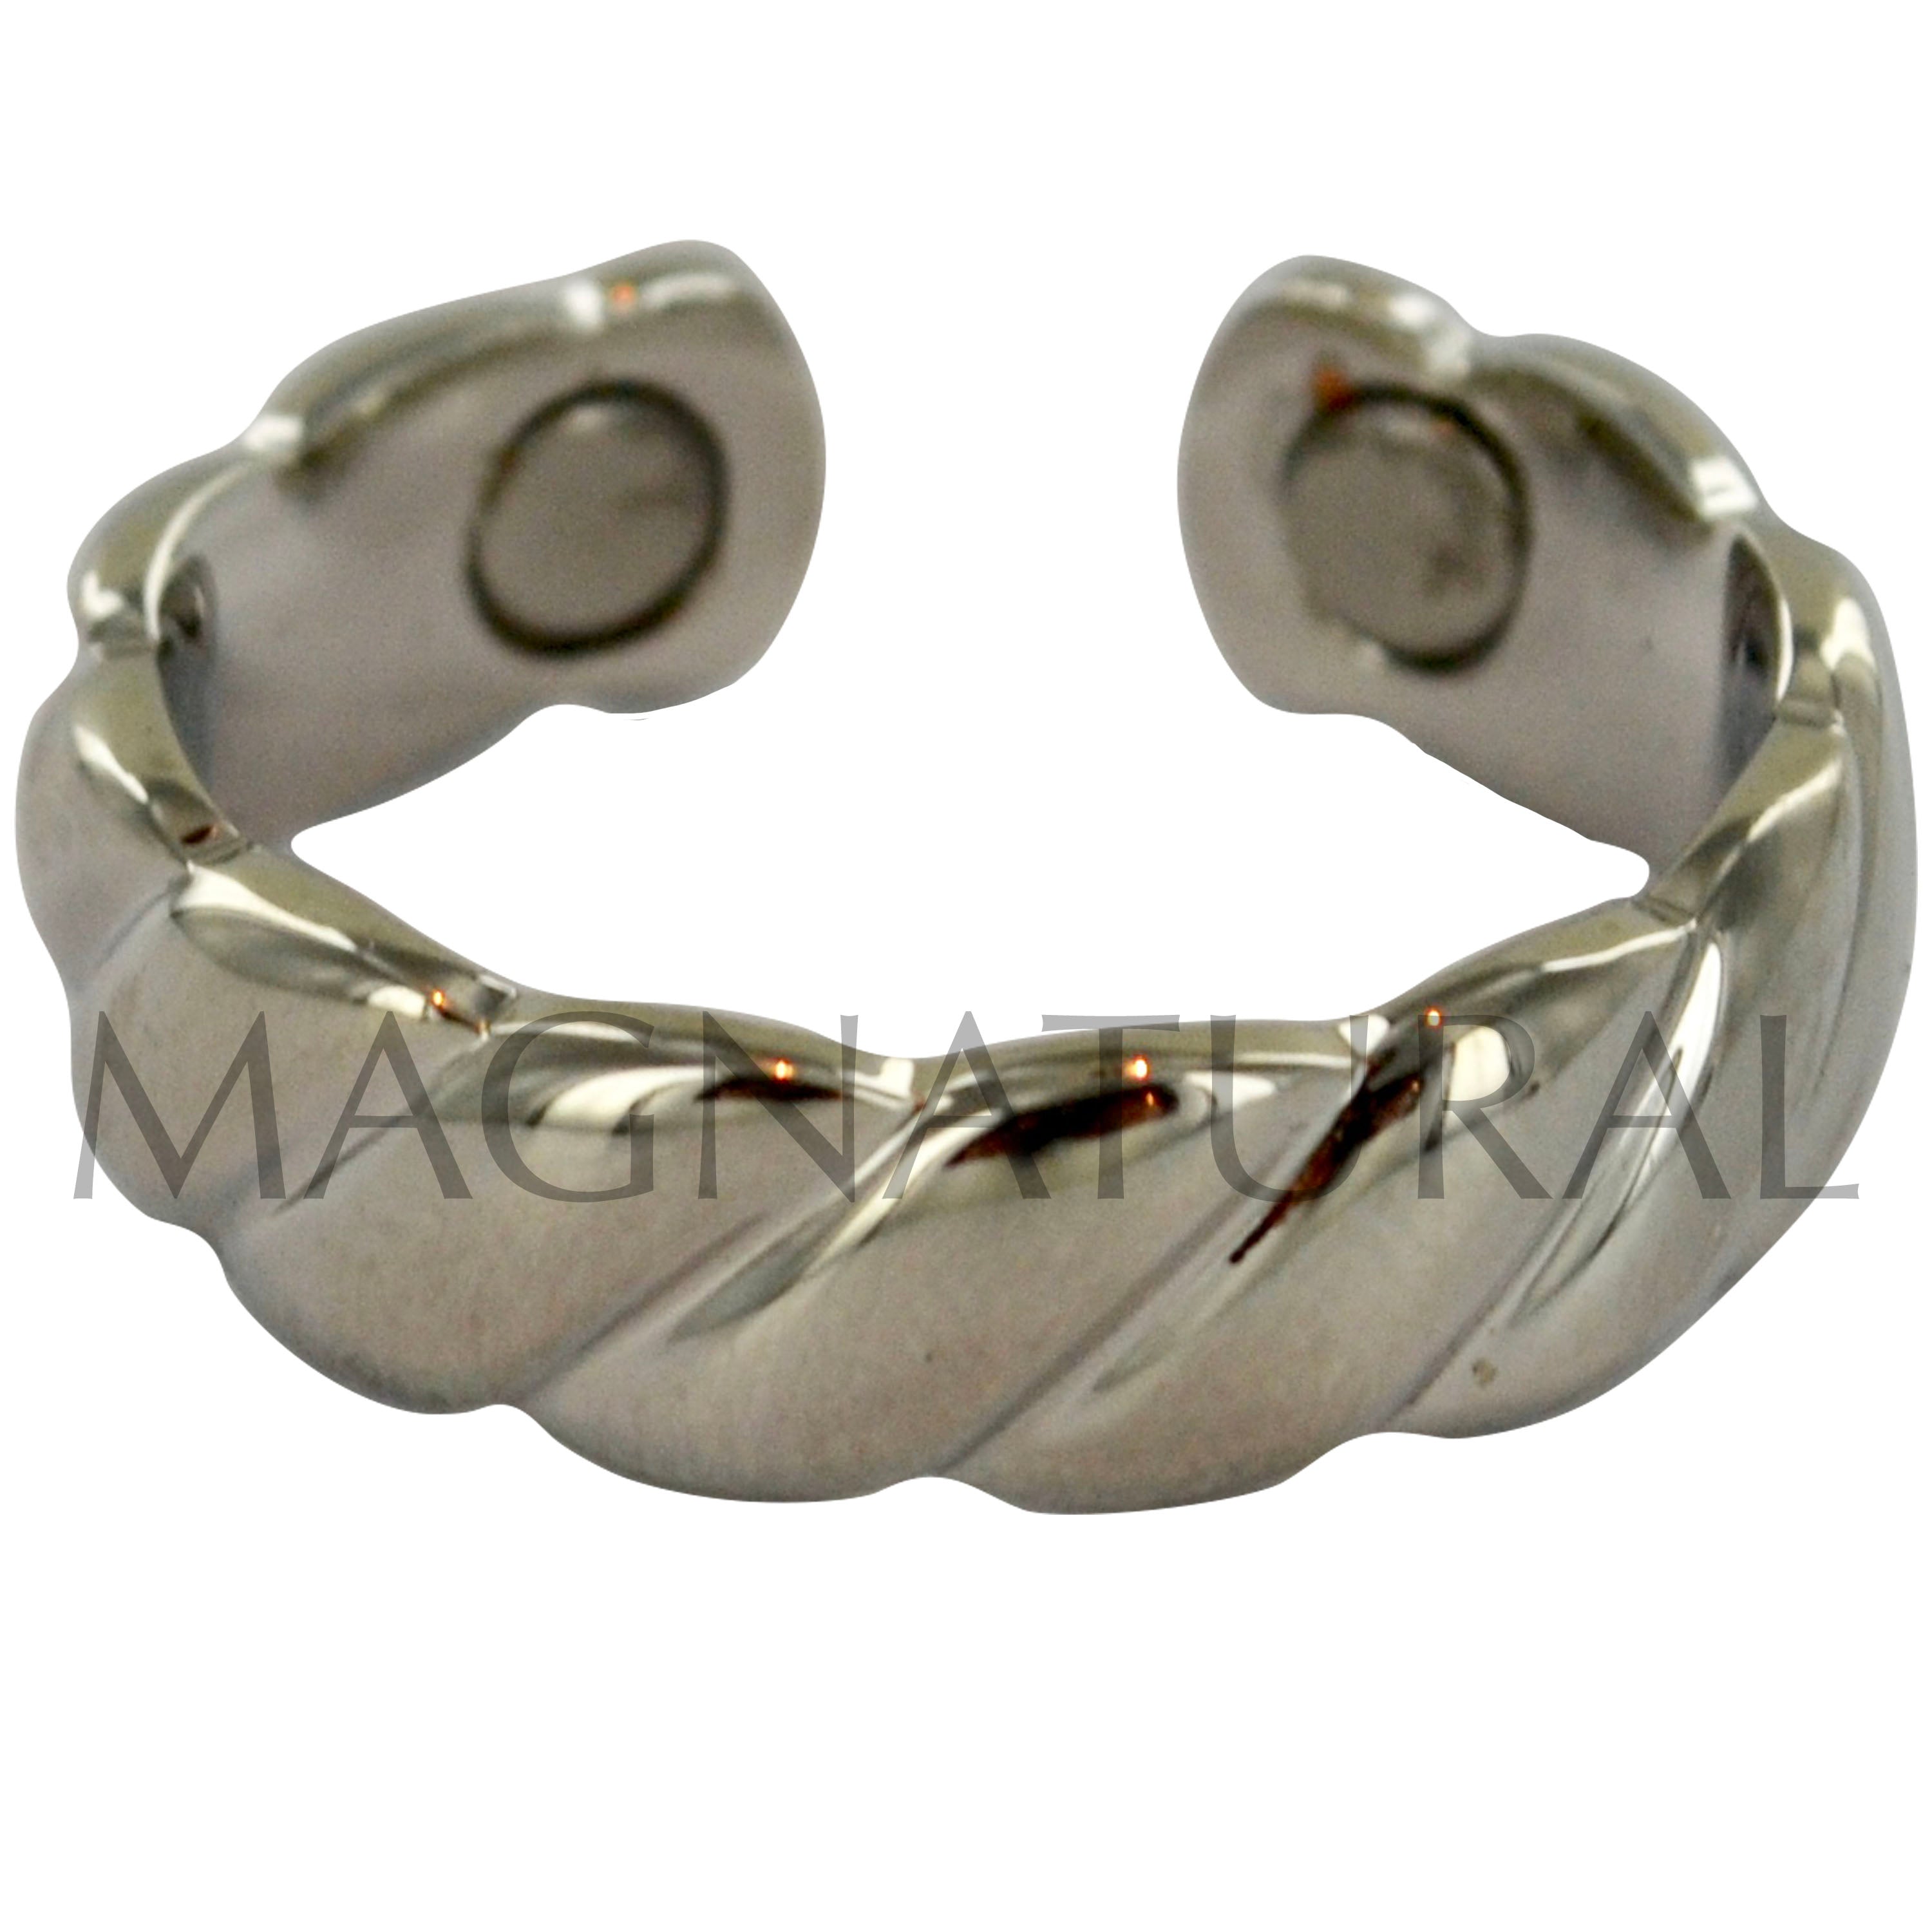 Magnetic Copper Ring - Ridged